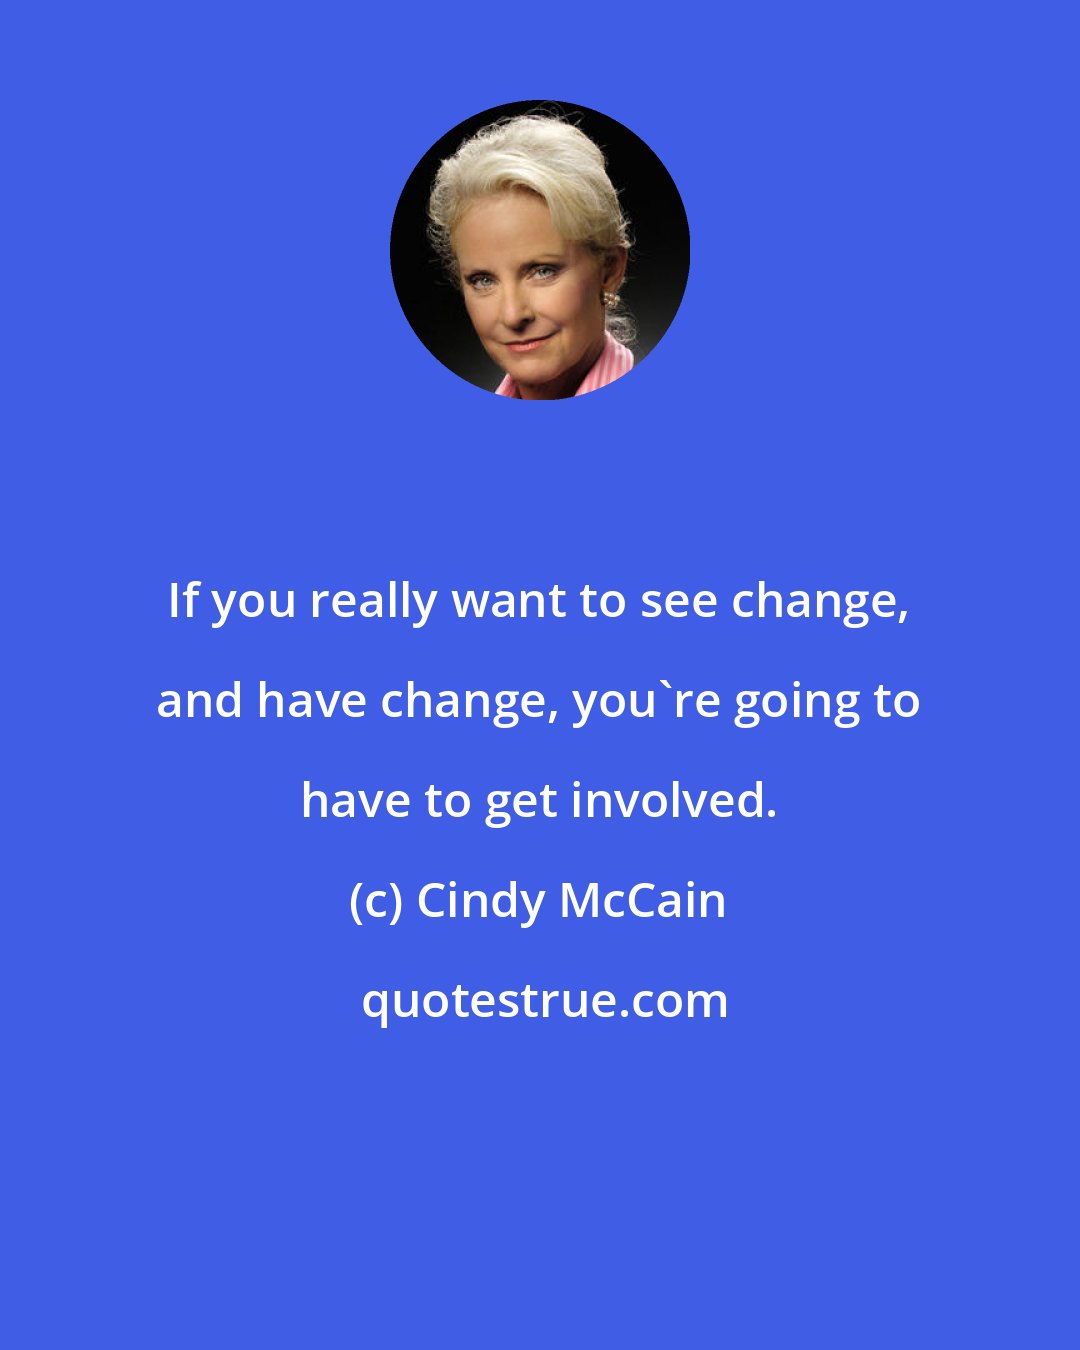 Cindy McCain: If you really want to see change, and have change, you're going to have to get involved.